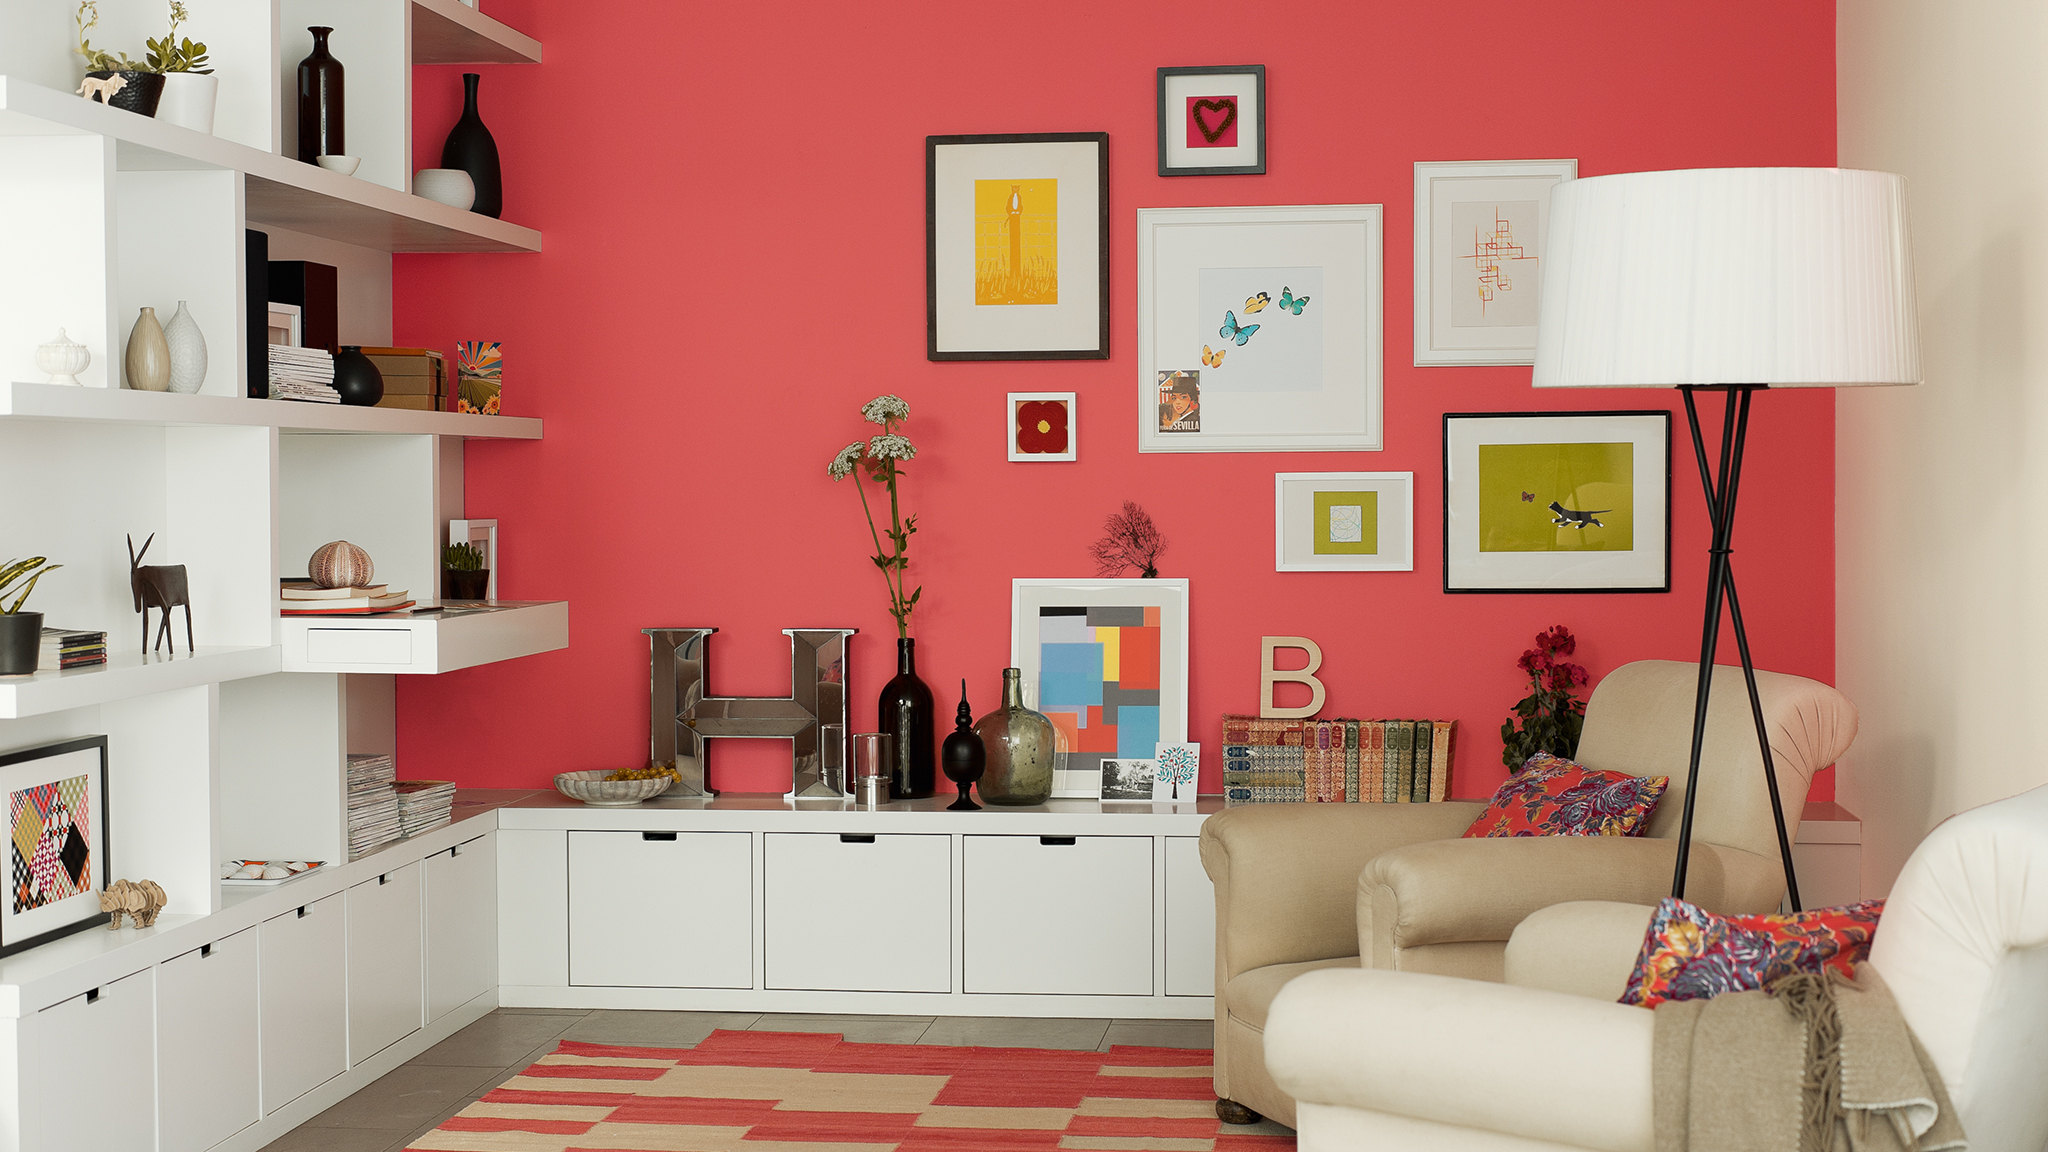 Add interest to your living room with a fun monochromatic scheme.
